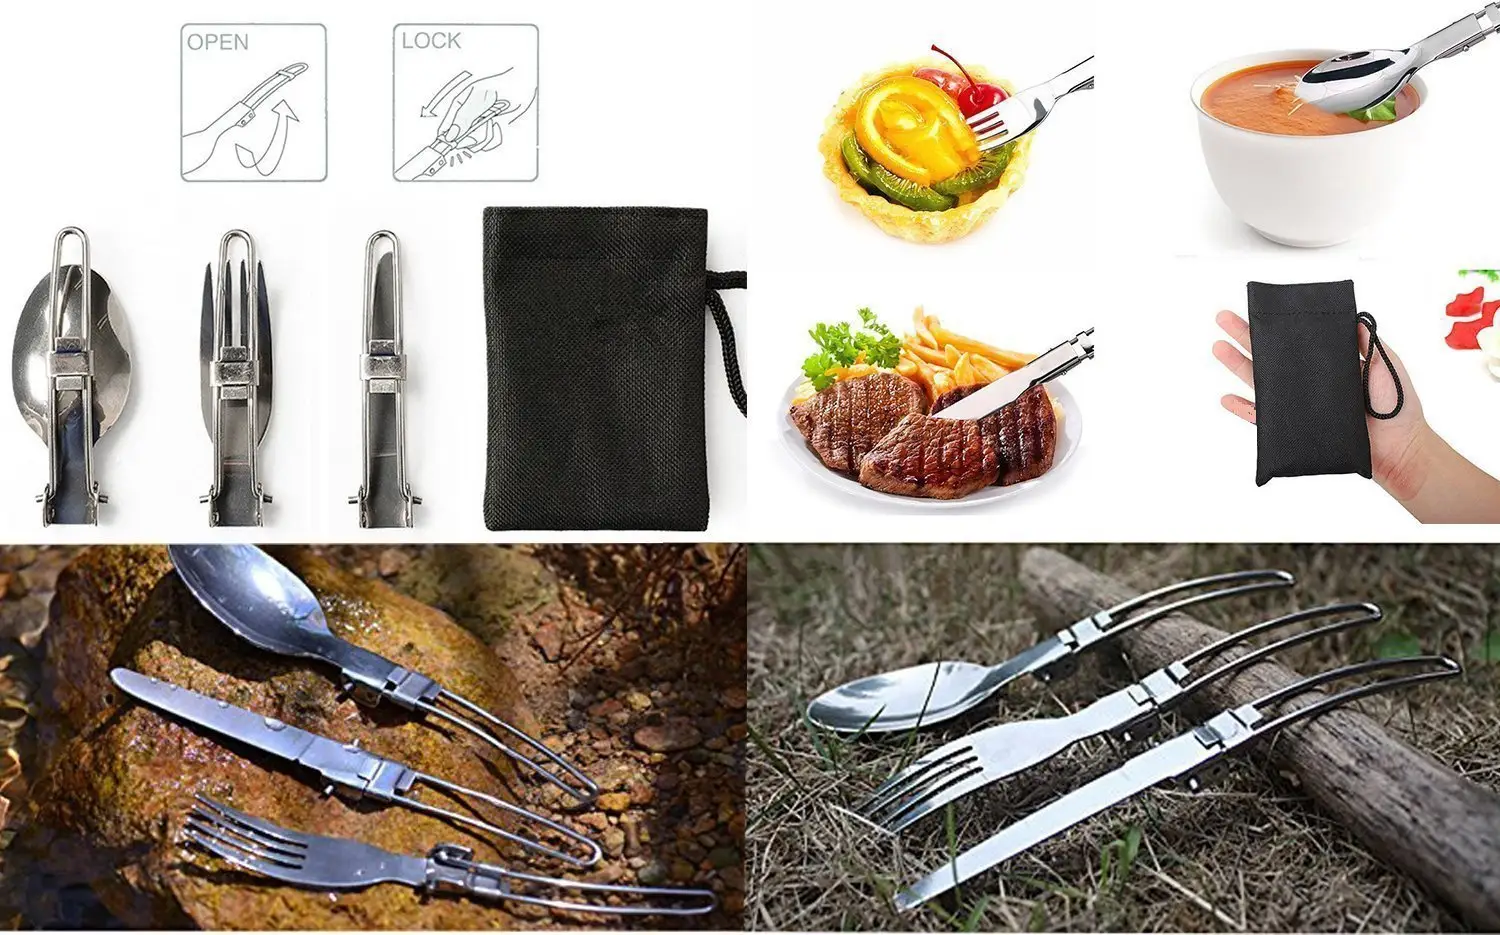 Your city 16pcs Hiking Backpacking Non stick Portable Outdoor Camping Cookware Set / Mess Kit / Cookset / Camp Kitchen